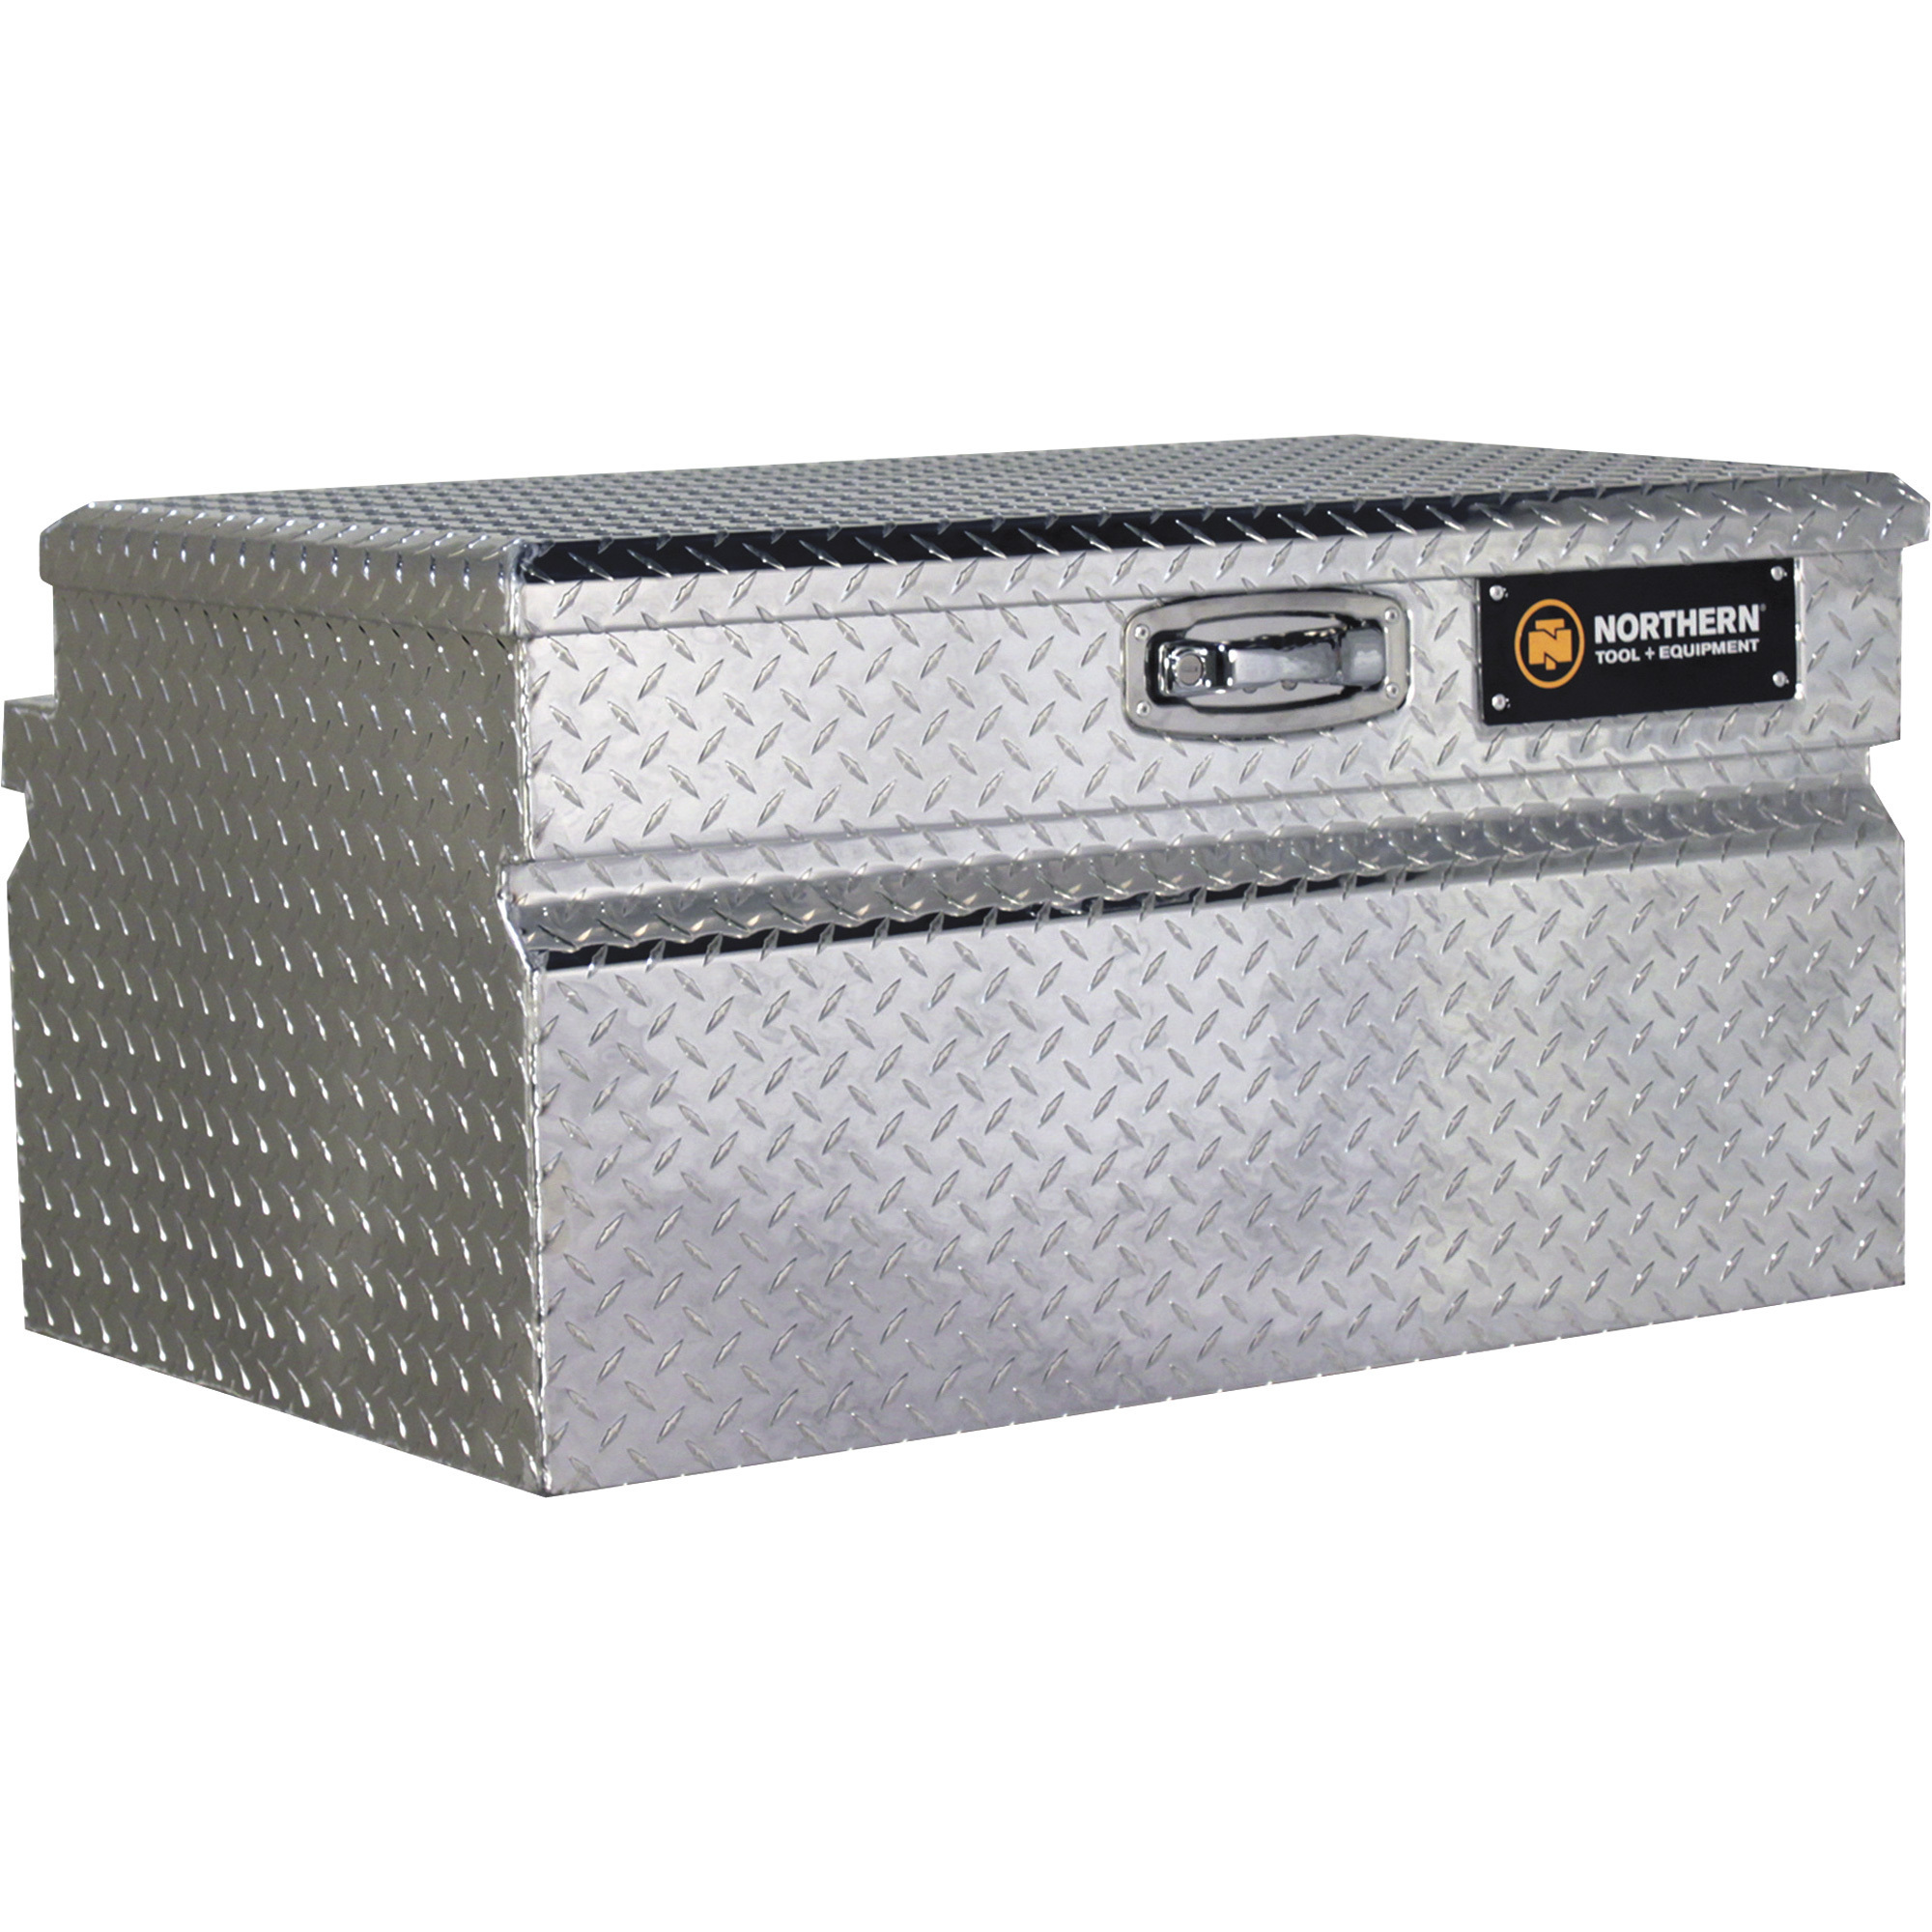 Northern Tool Wide Chest Truck Tool Box — Aluminum, Diamond Plate, Pull Handle